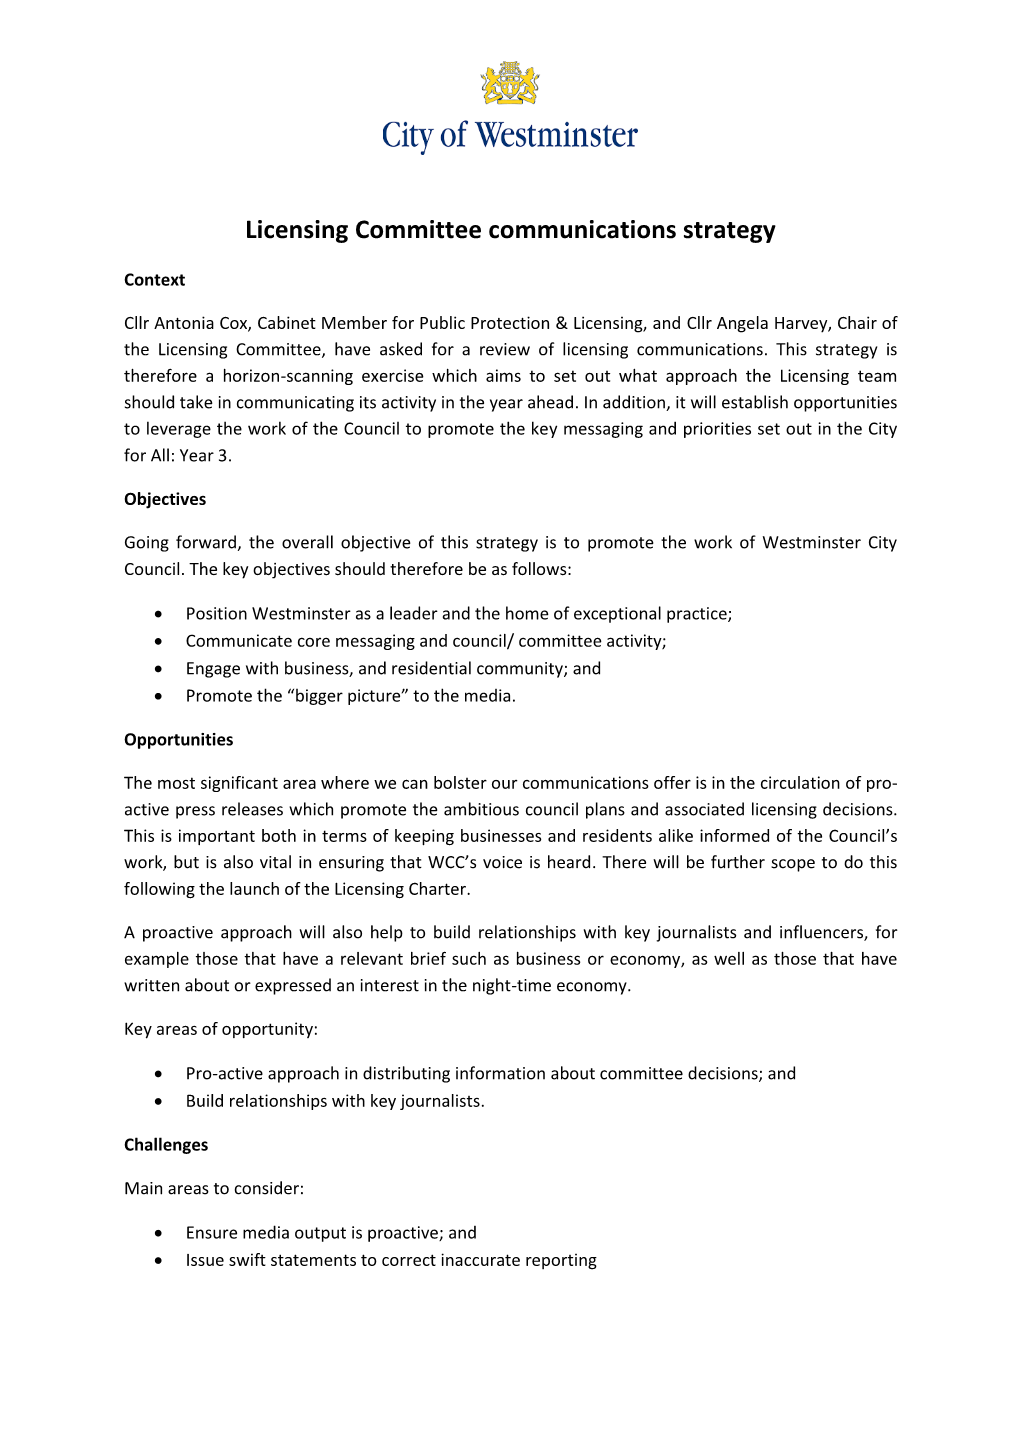 Licensing Committee Communications Strategy